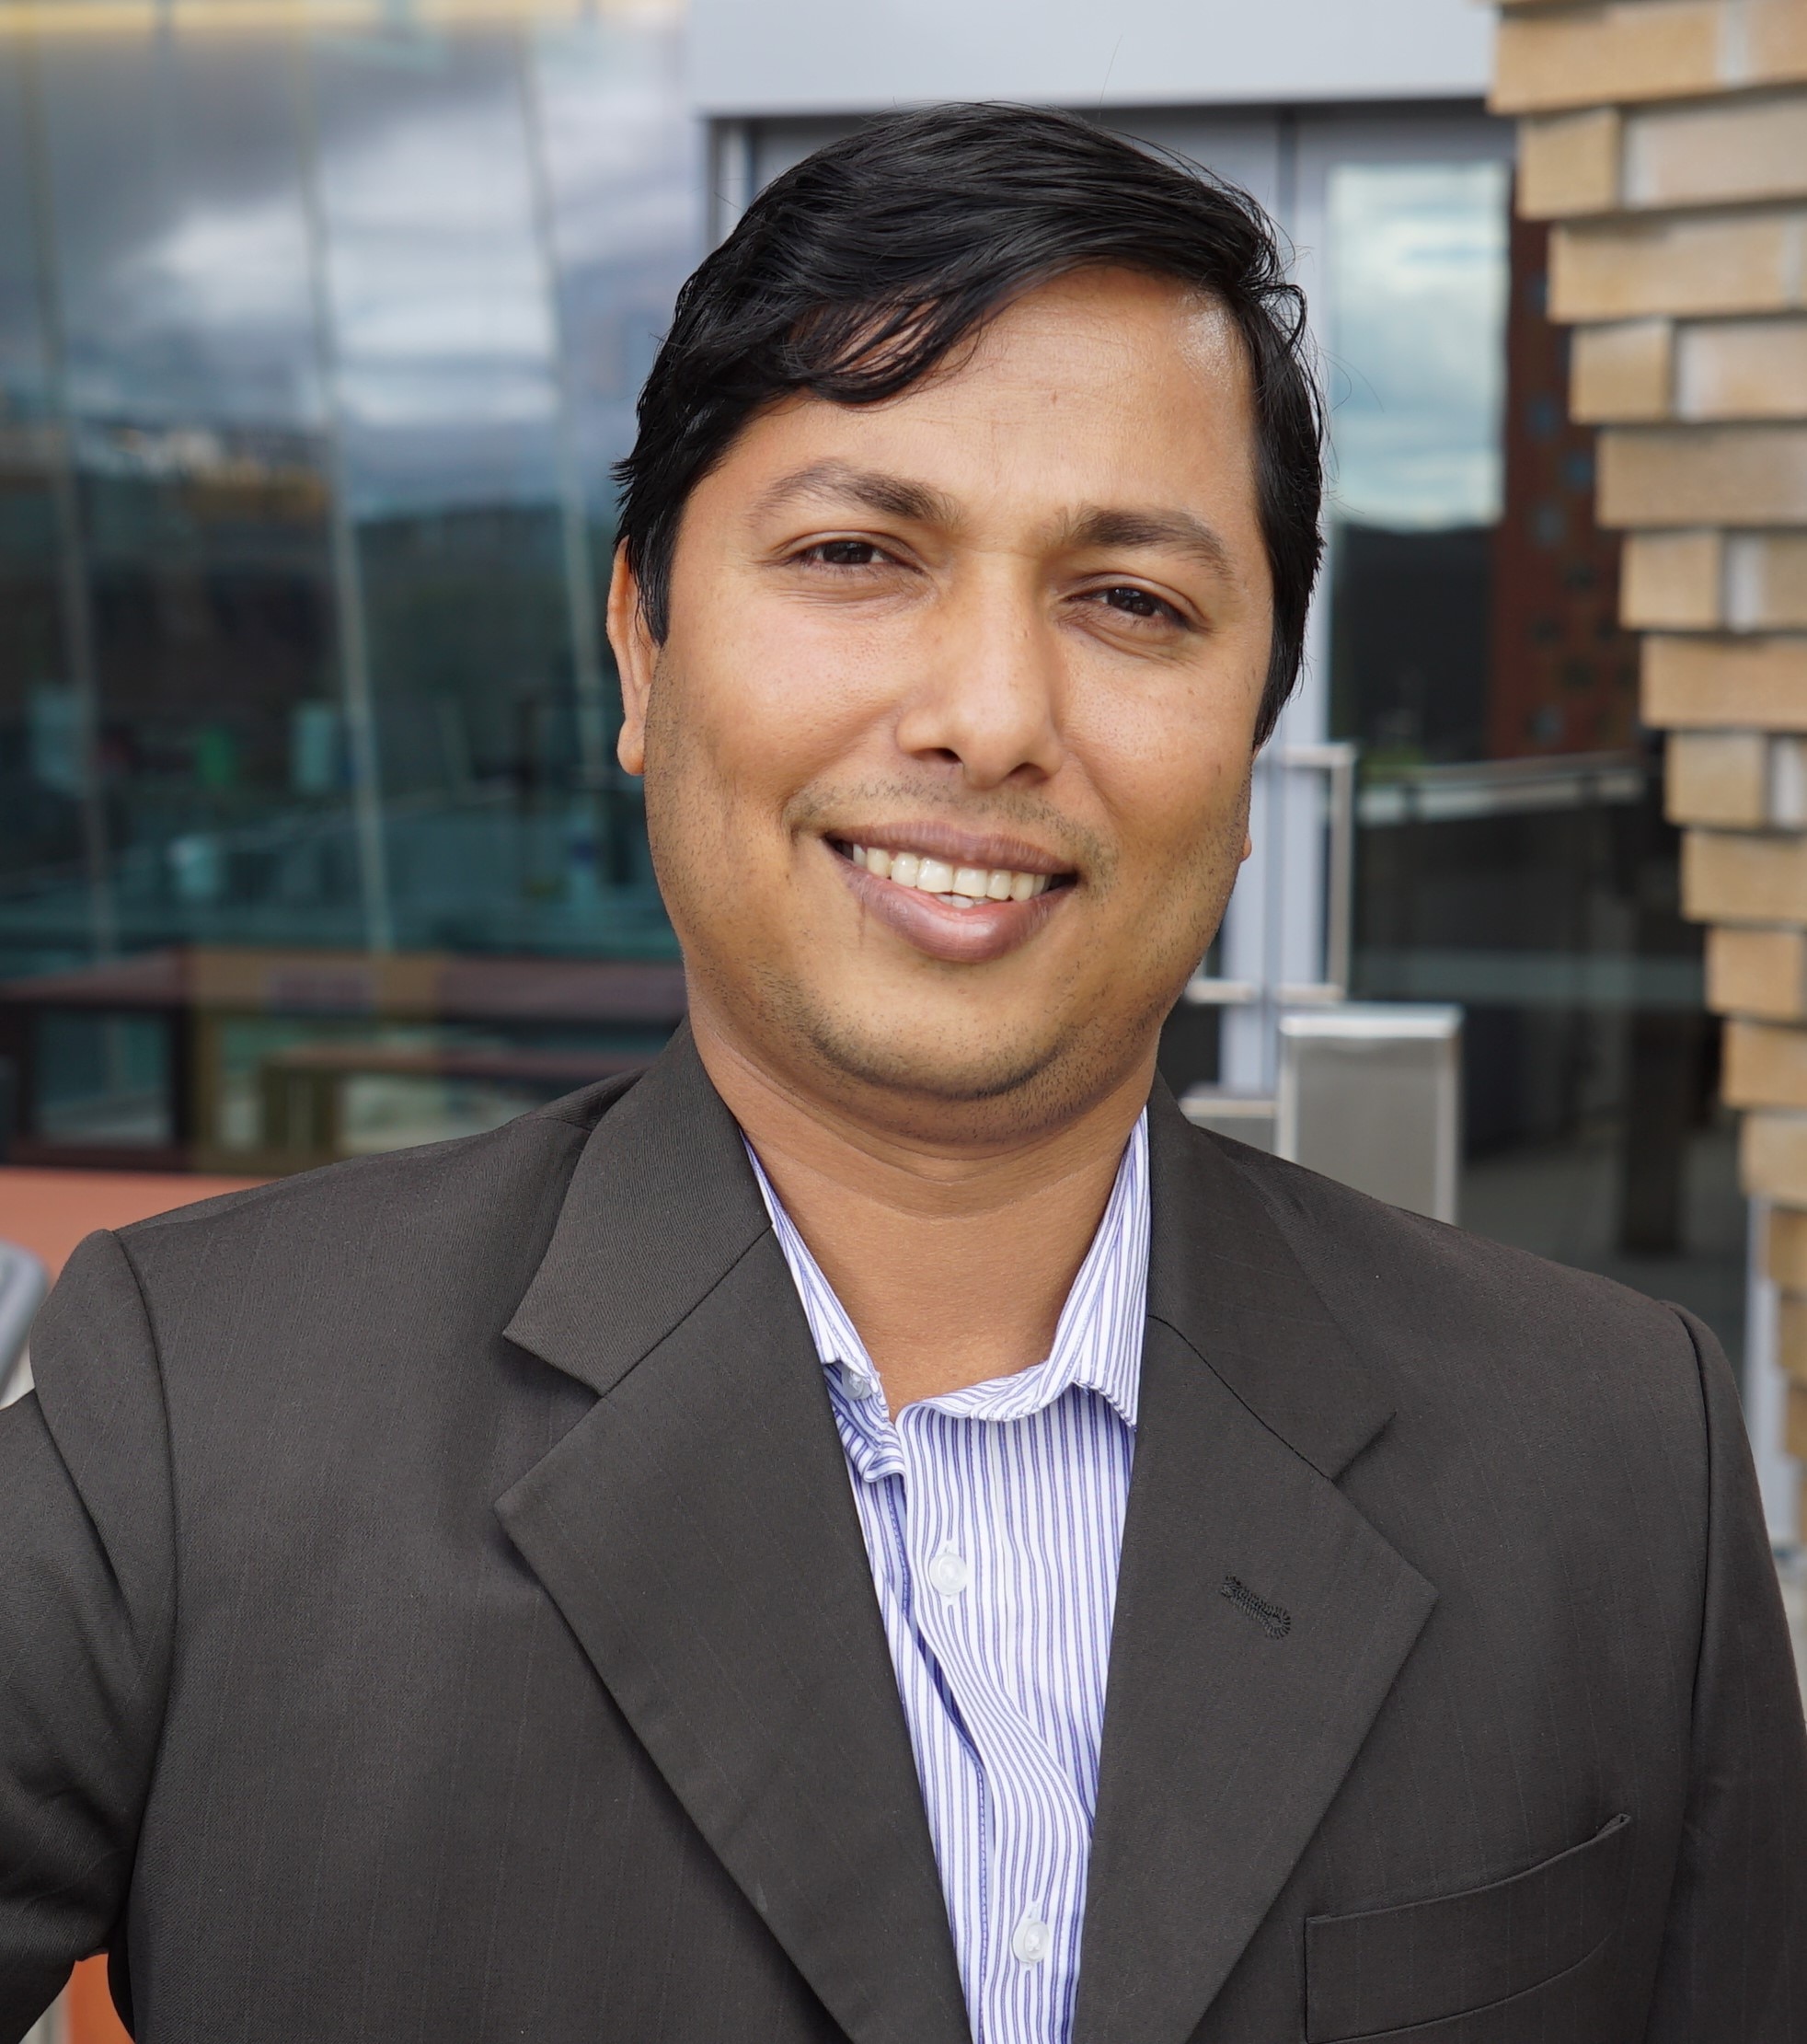 Dr Sanjoy Paul is the Program Director of Master of Strategic Supply Chain Management programs and a Senior Lecturer in the UTS Business School.